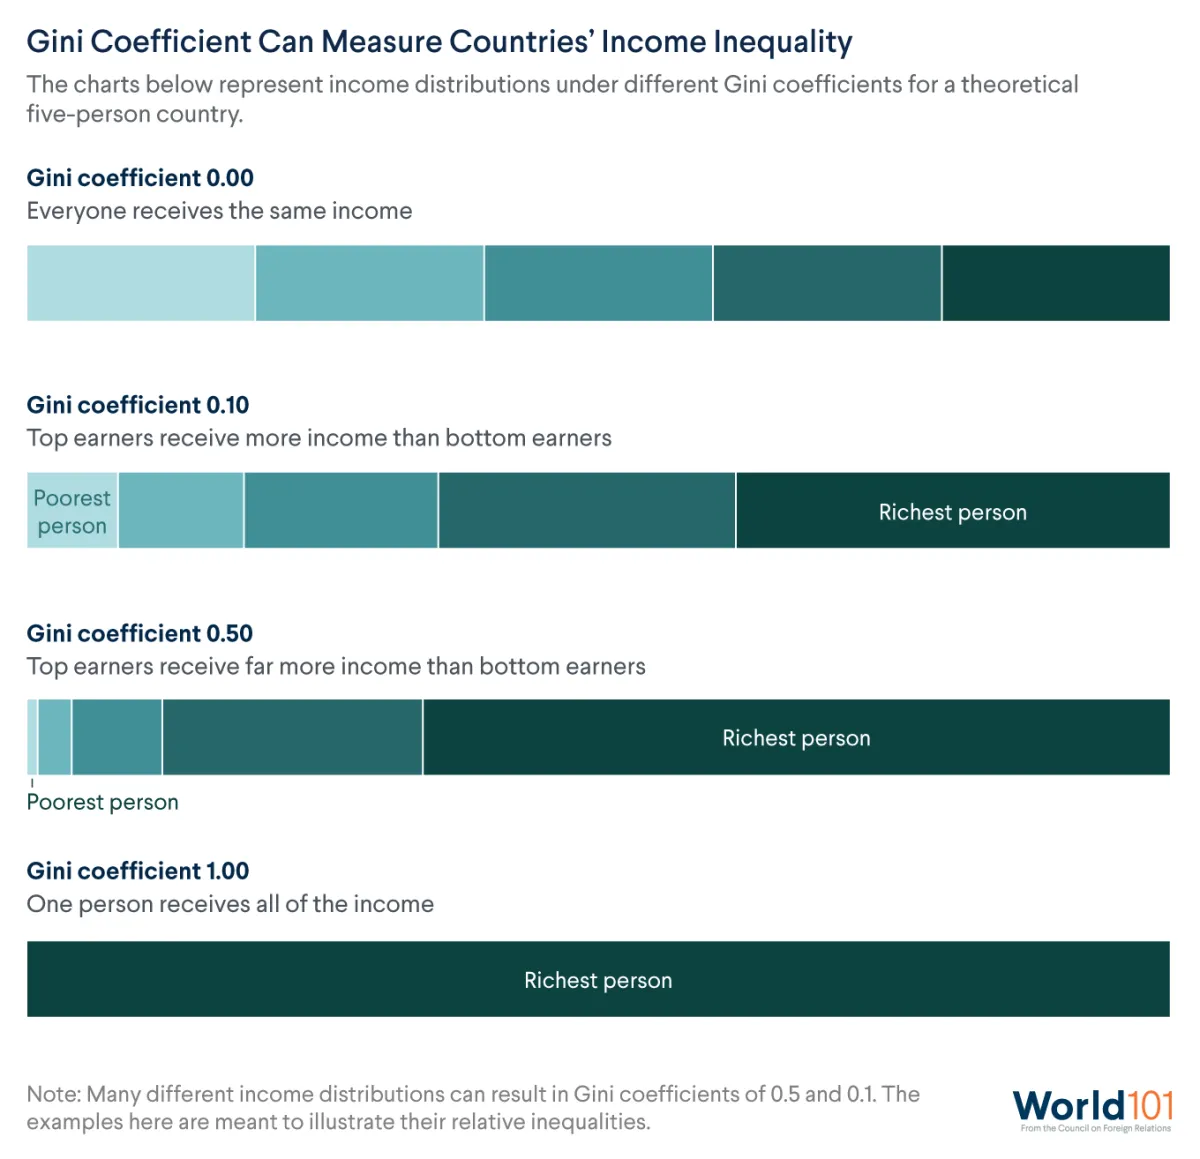 Graphic uses shaded bars to demonstrate different potential distributions of wealth at different gini coefficients. For more info contact us at world101@cfr.org.